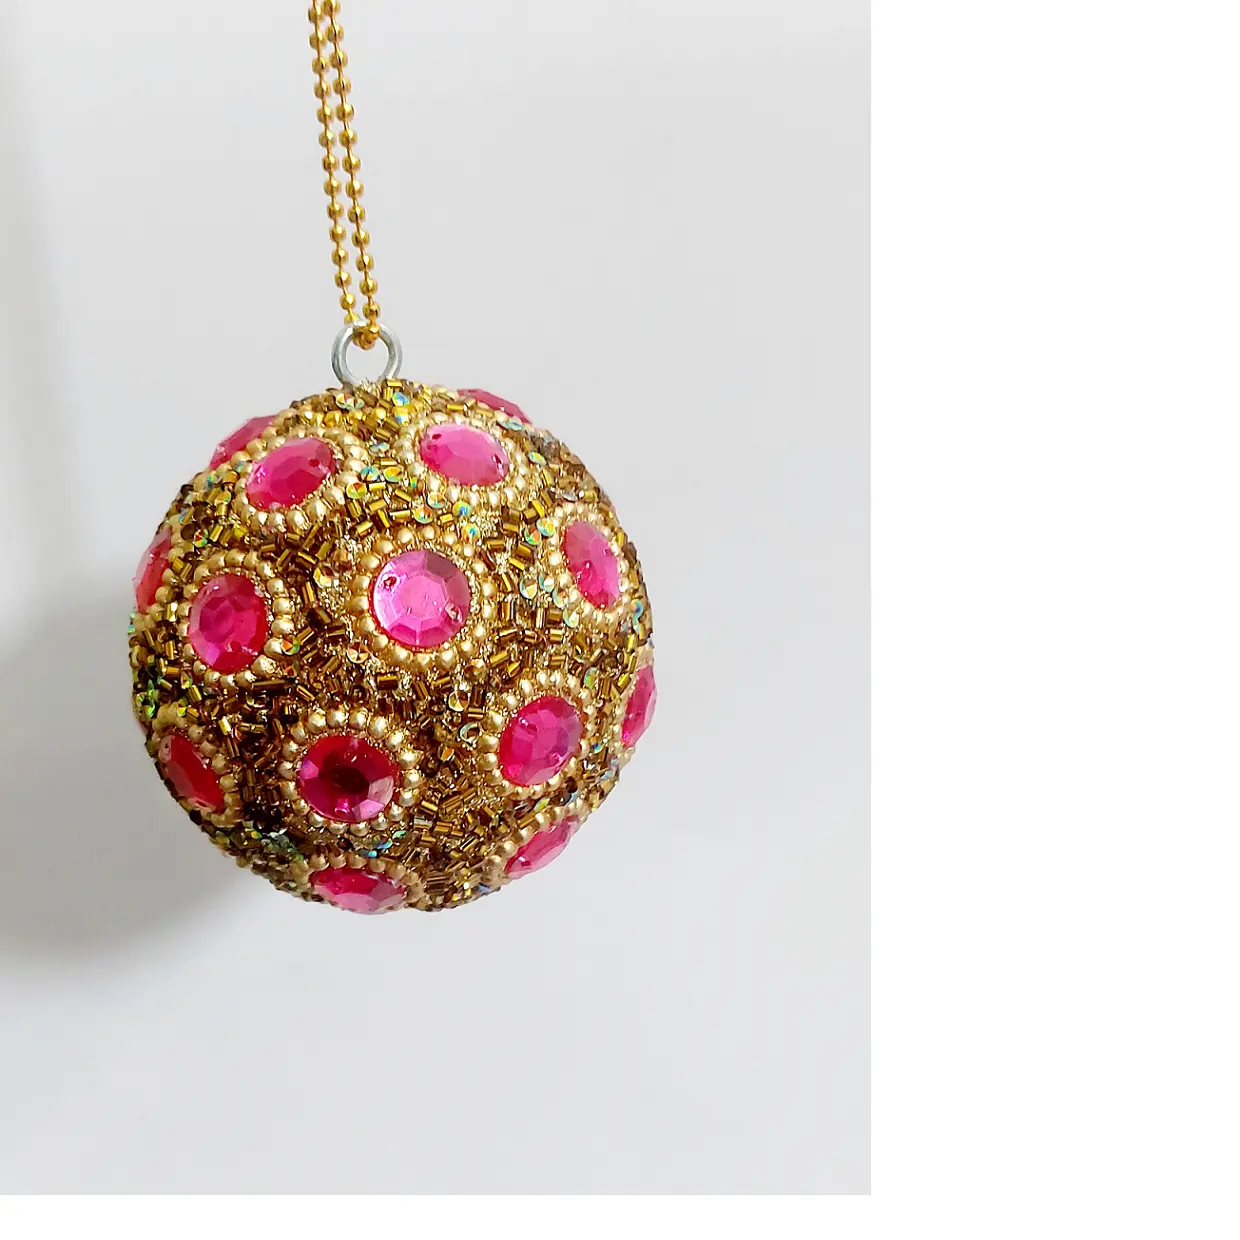 beaded Christmas balls and ornaments for Christmas tree decorations, available in a huge assortment of sizes